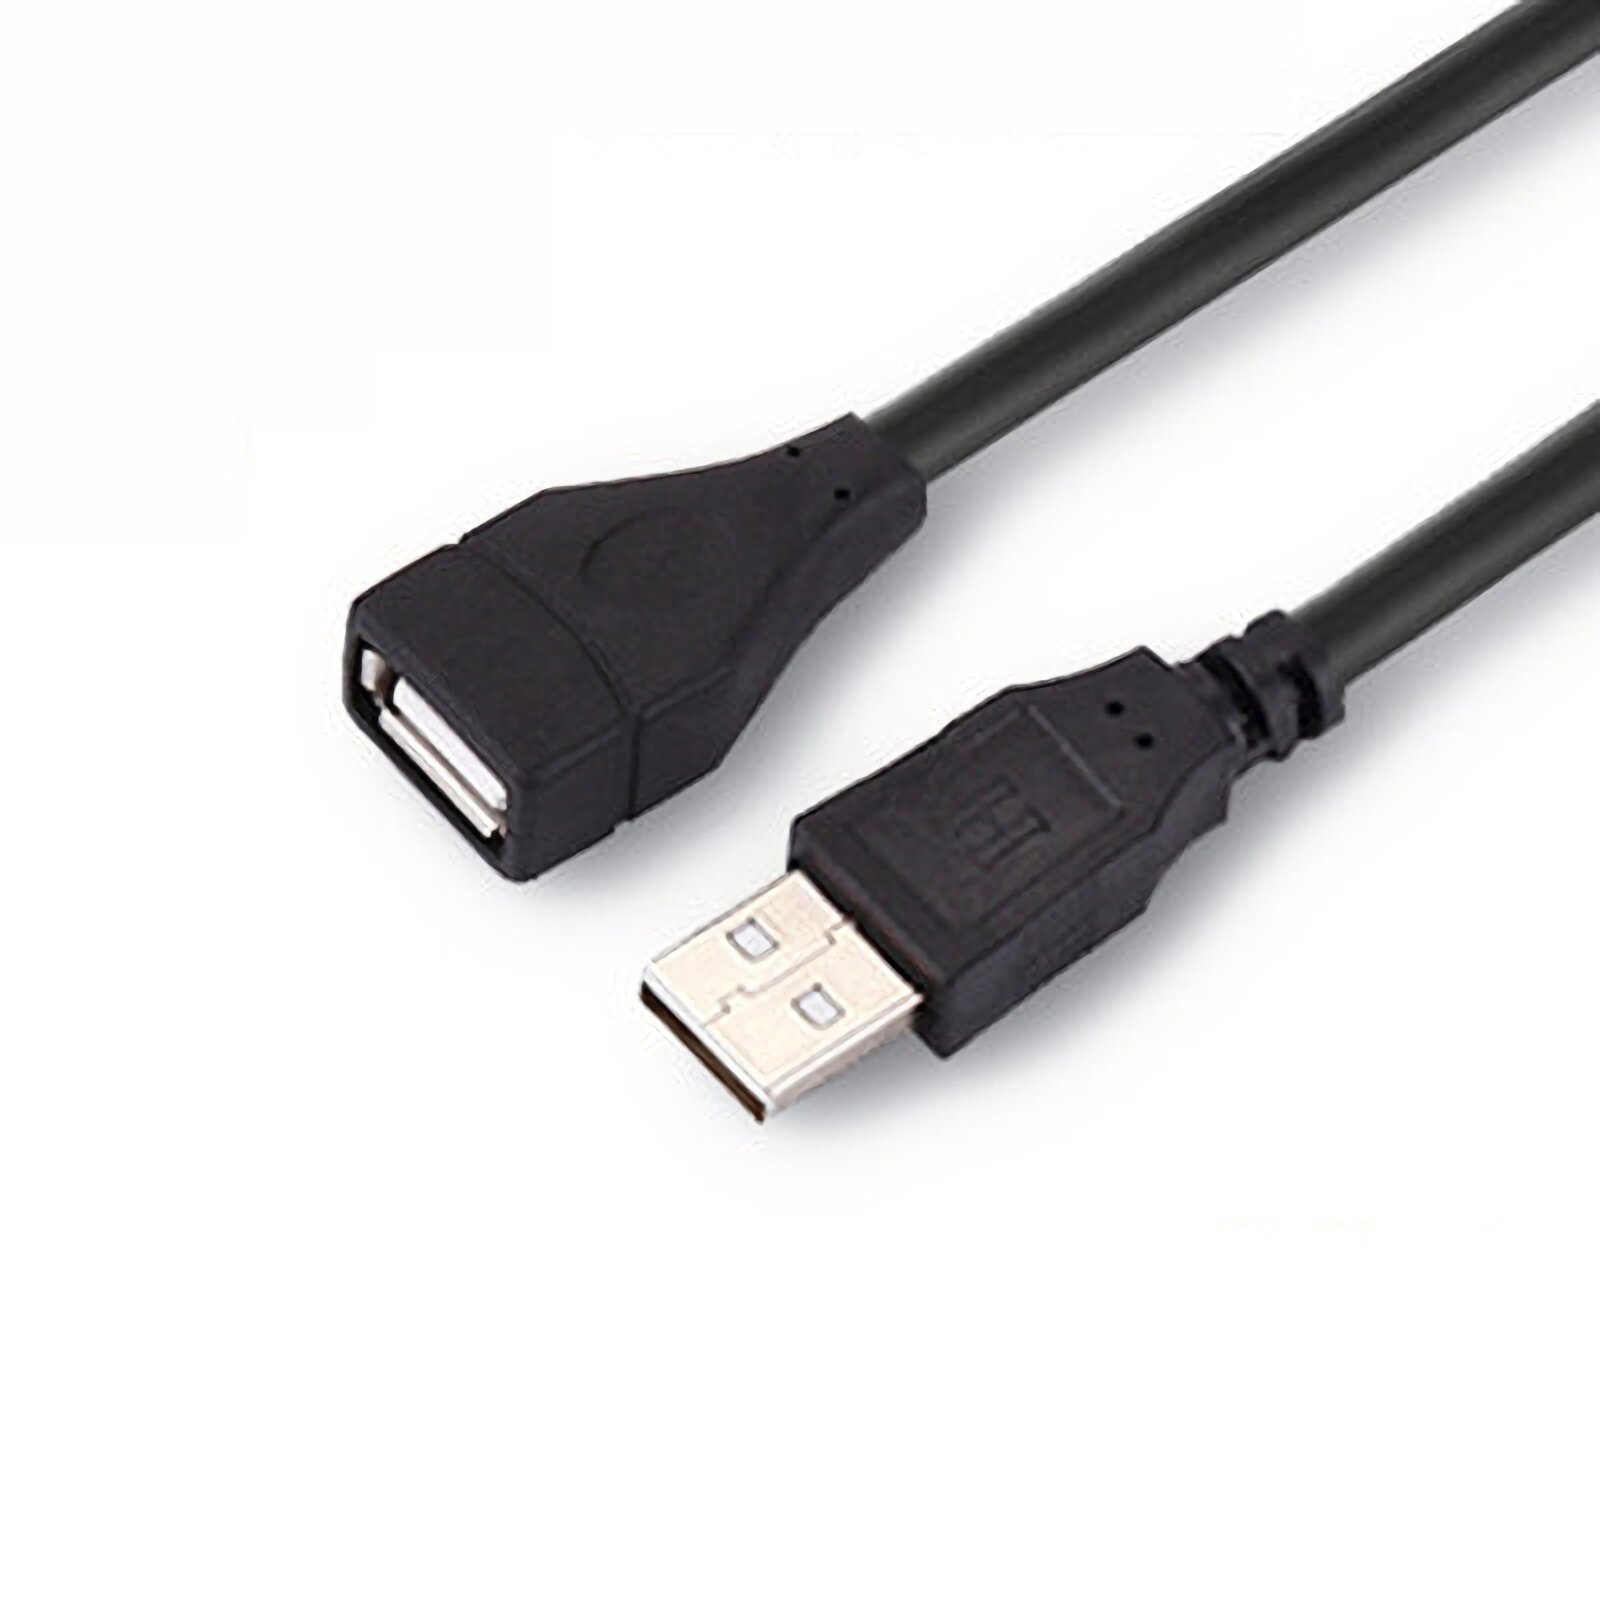 DAMAG 1.5m USB Extension CableUSB2.0All Copper Material For Laptop USB Devices Connection